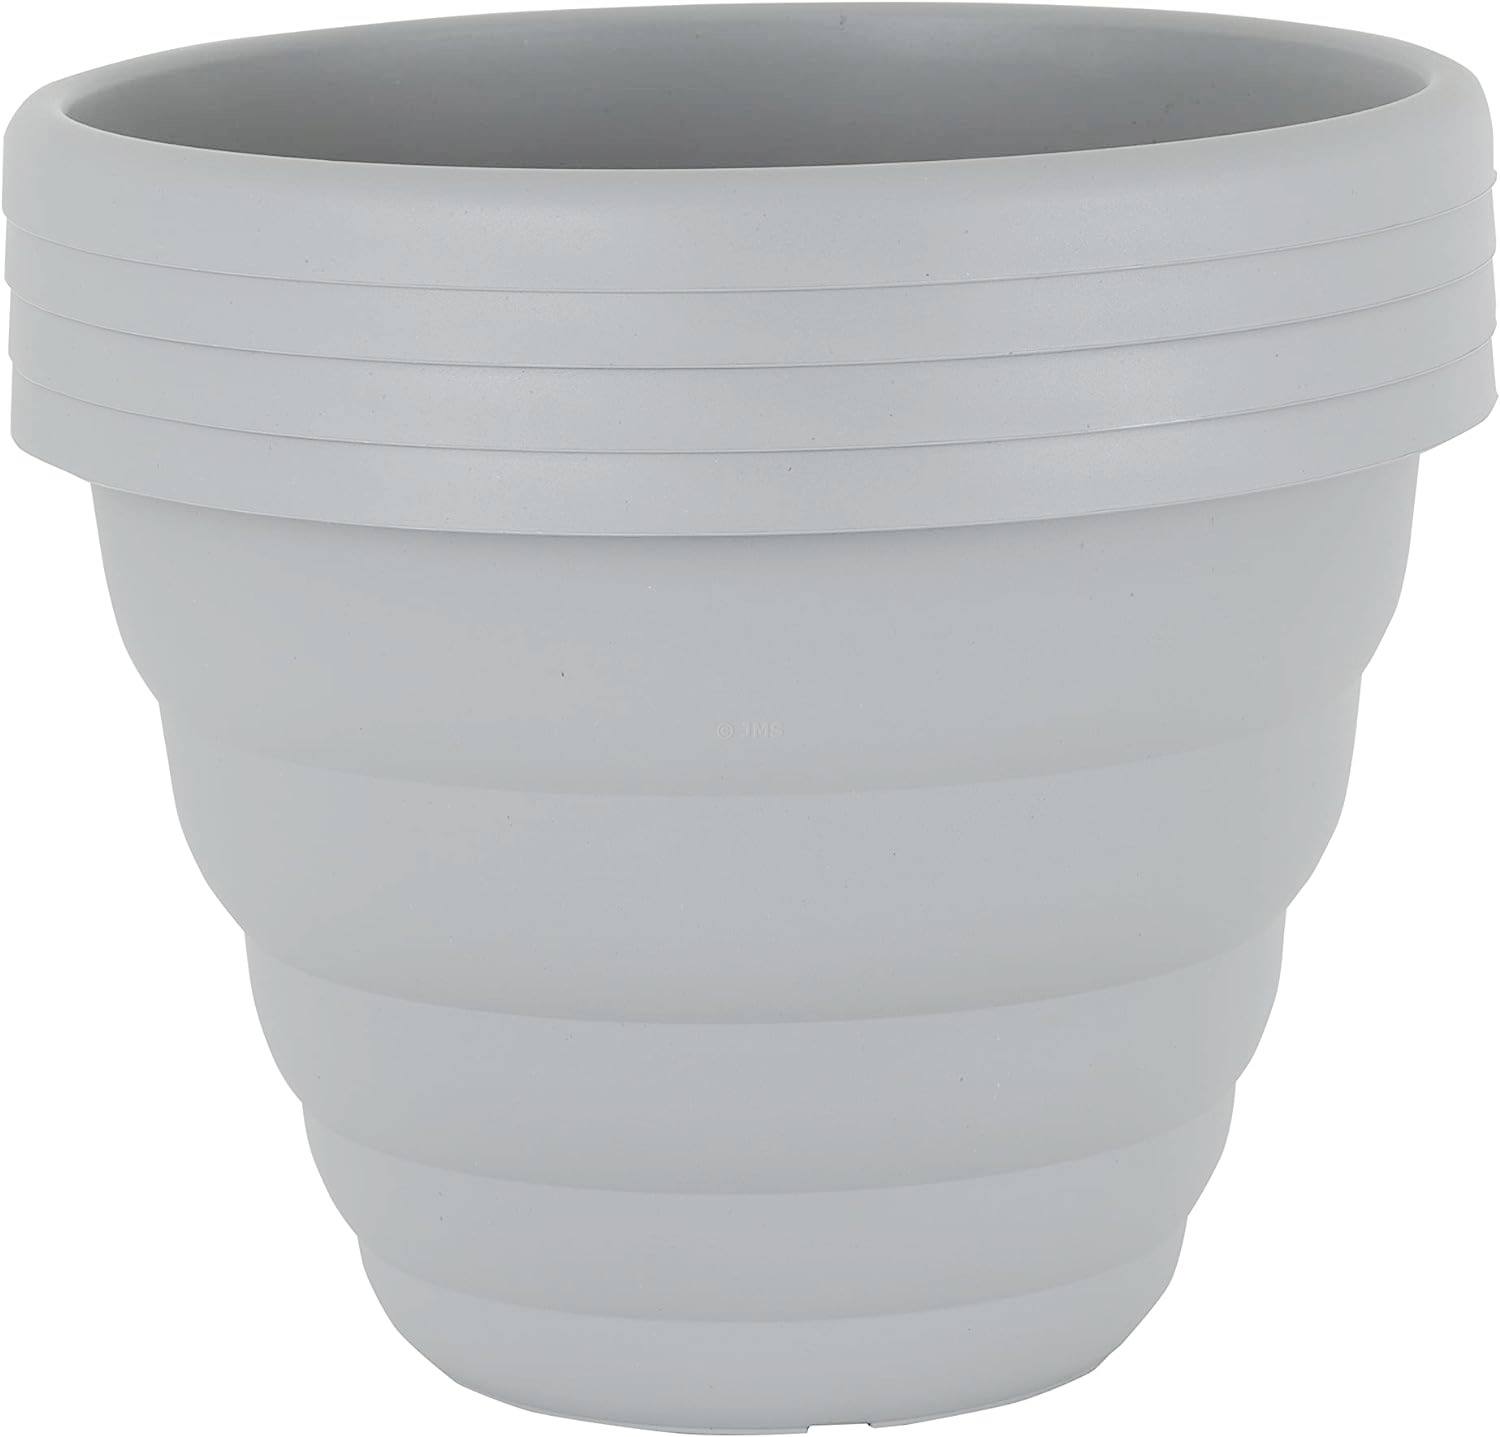 [Set of 4] Beehive Garden Planter 40cm Round Plant Pot (22 Litres) Cement Grey Recycled Plastic Home Office Restaurant Cafe - Made in Britain